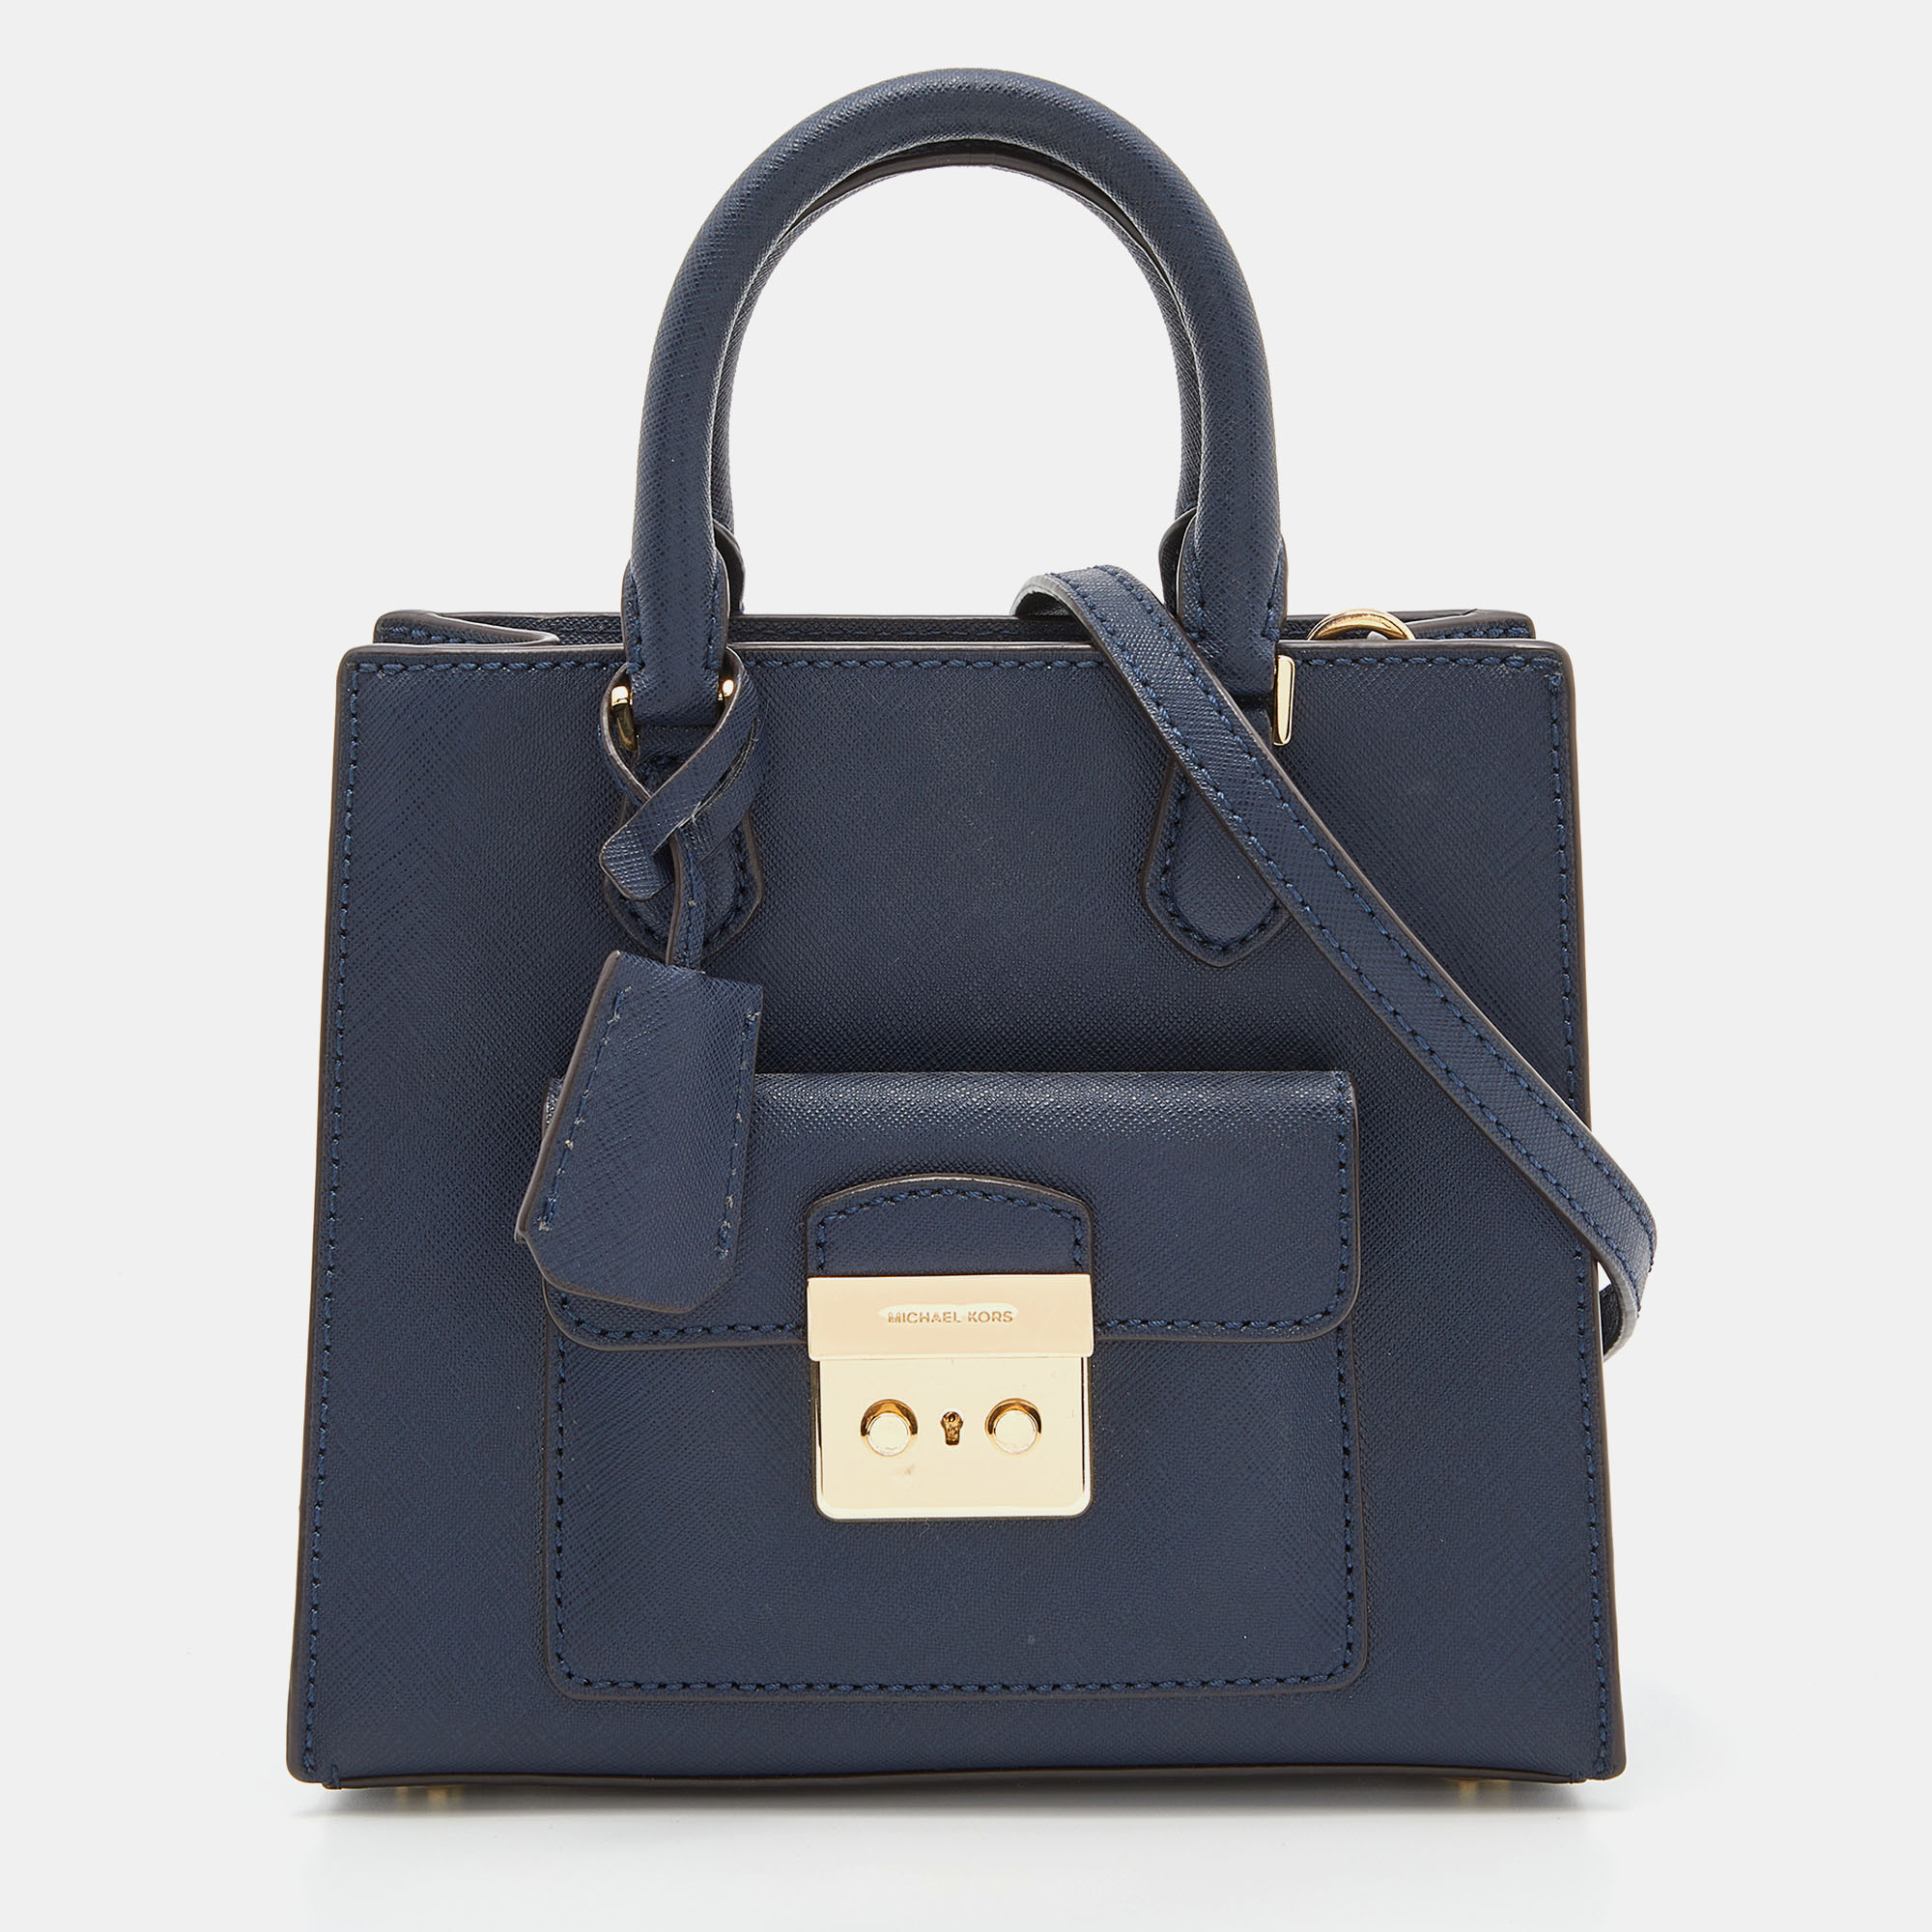 A classic handbag comes with the promise of enduring appeal boosting your style time and again. This MK bag is one such creation. It's a fine purchase.